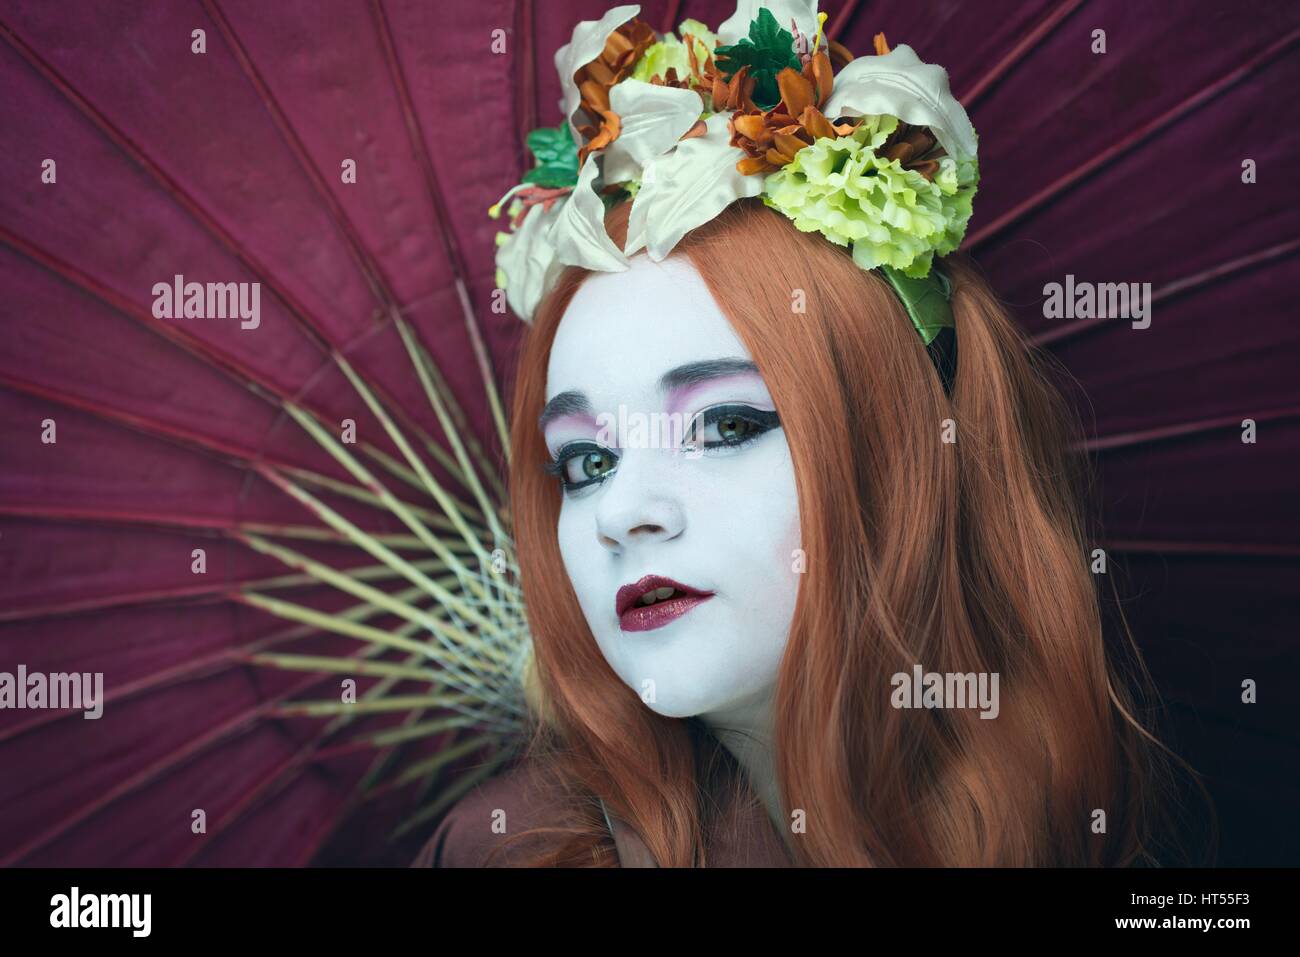 Woman dressed as a Geisha girl with parasol and floral garland in her hair Stock Photo